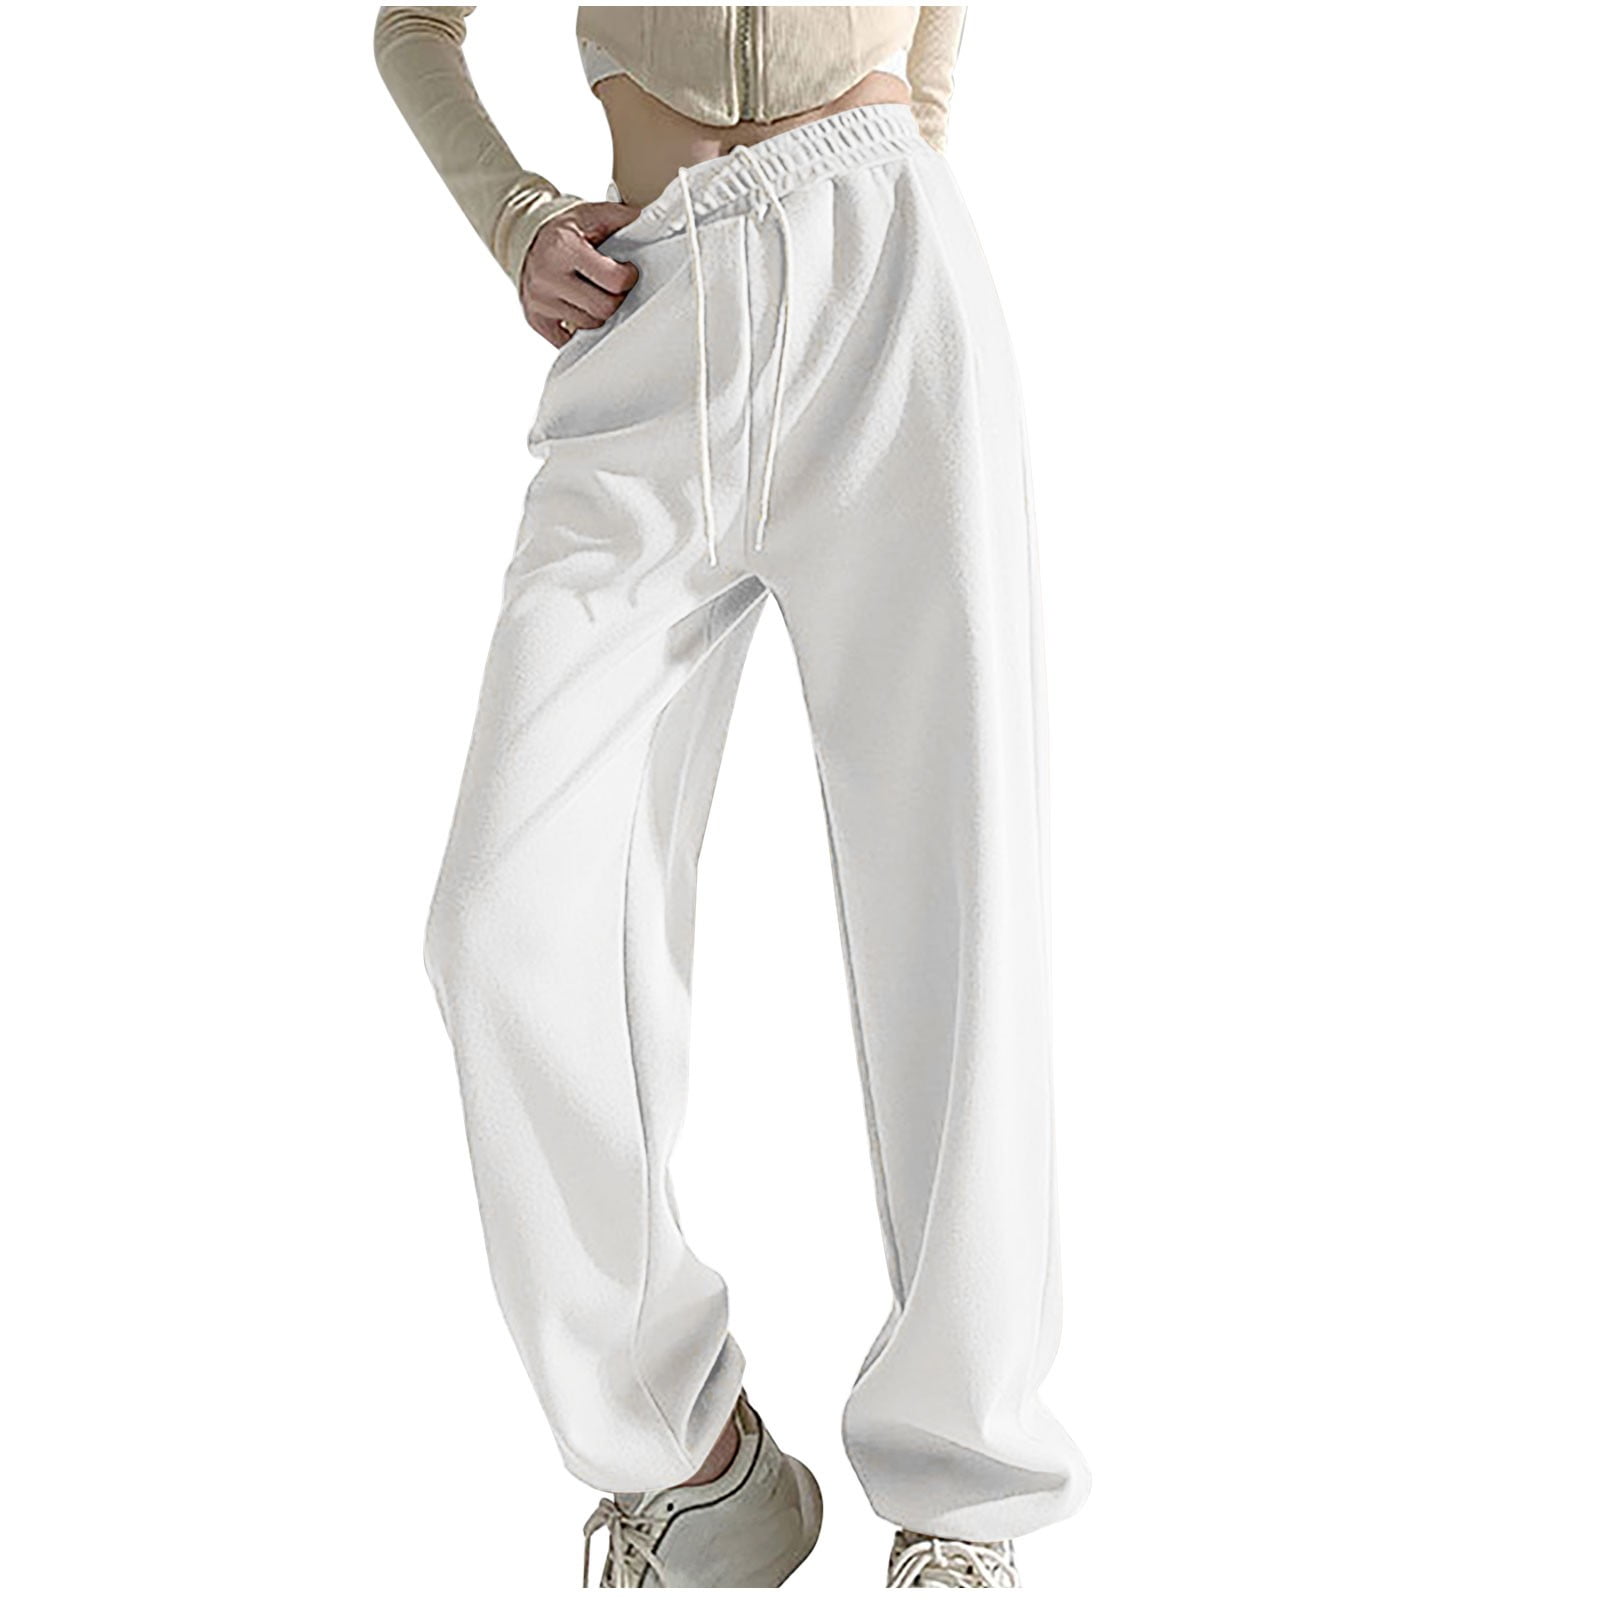 Olyvenn Women's Large Size Casual Sweatpants Daily Long Trousers for ...